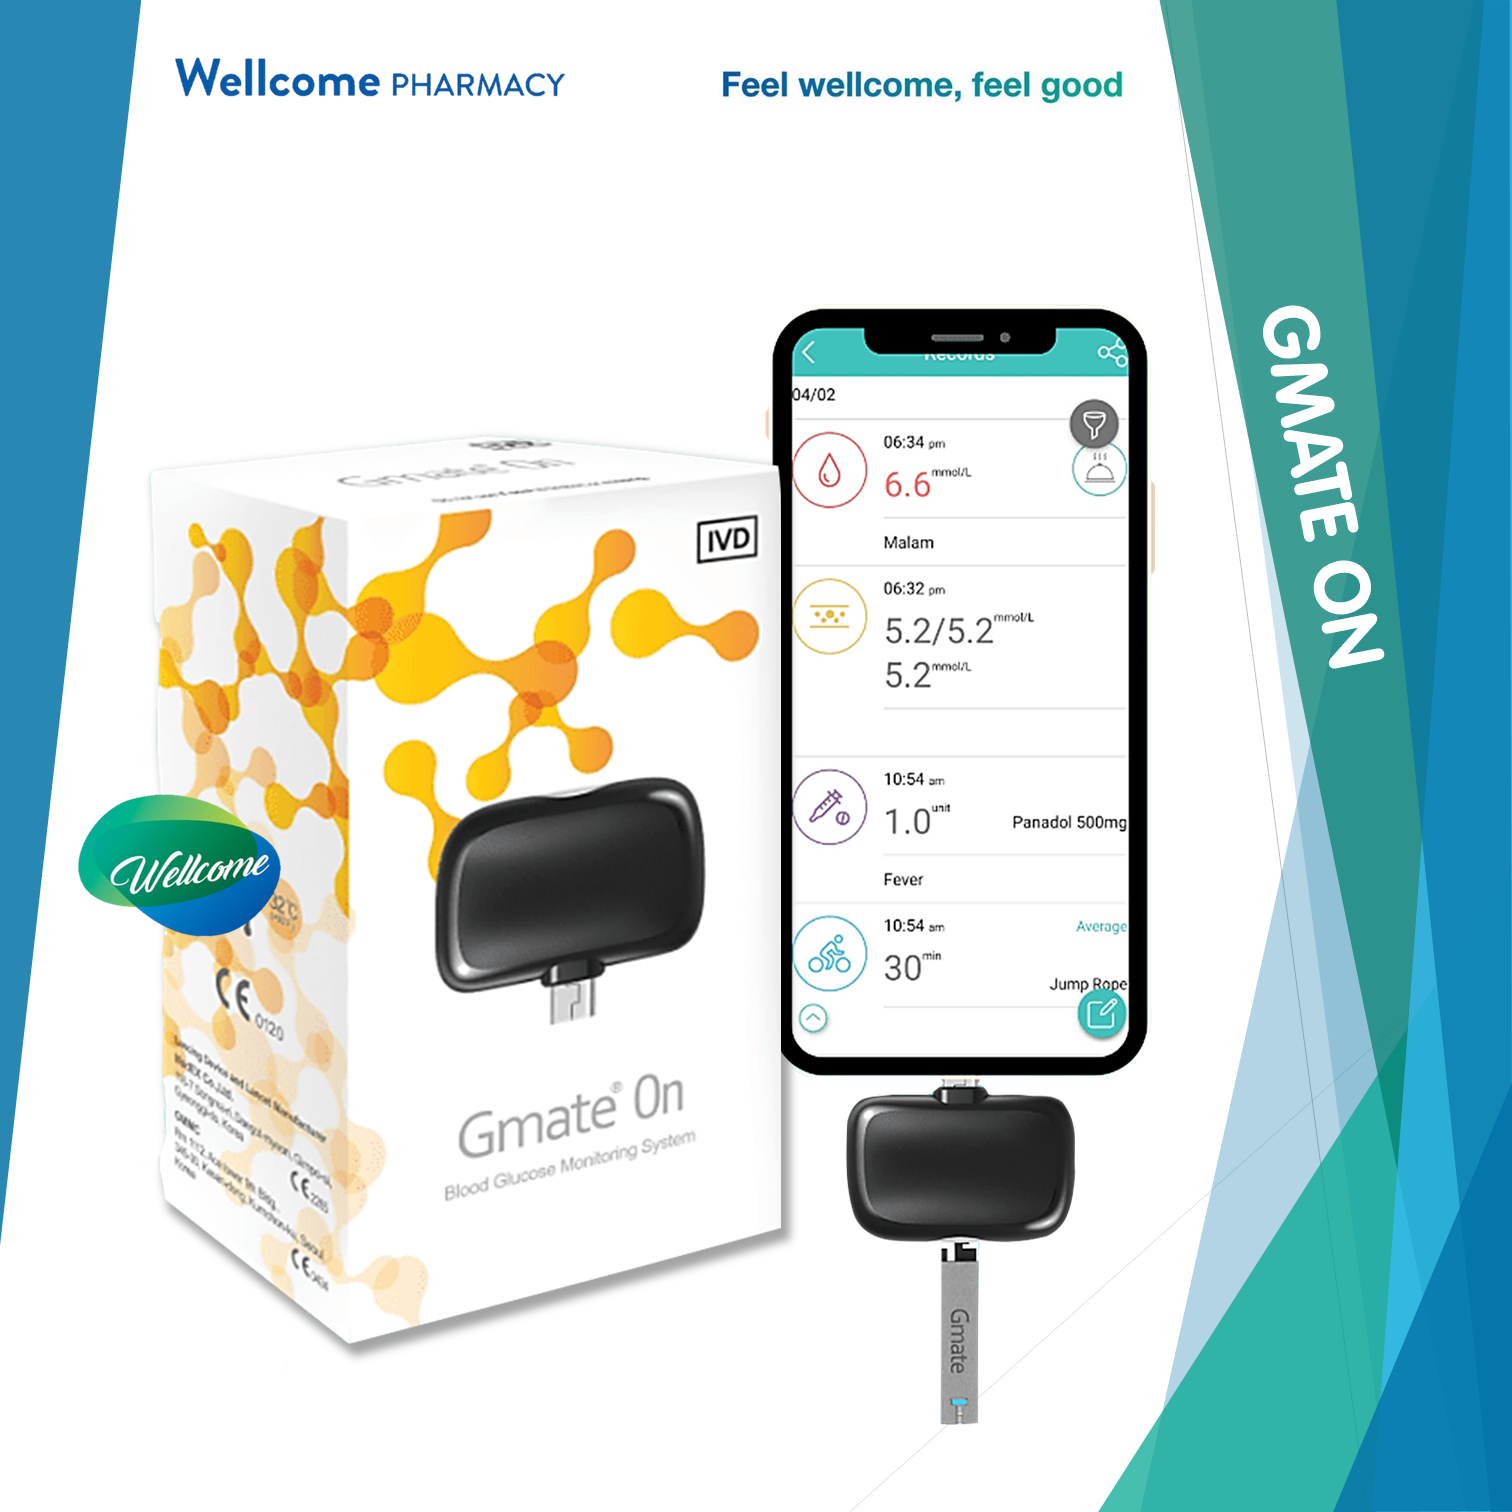 Gmate On Glucose Meter.png